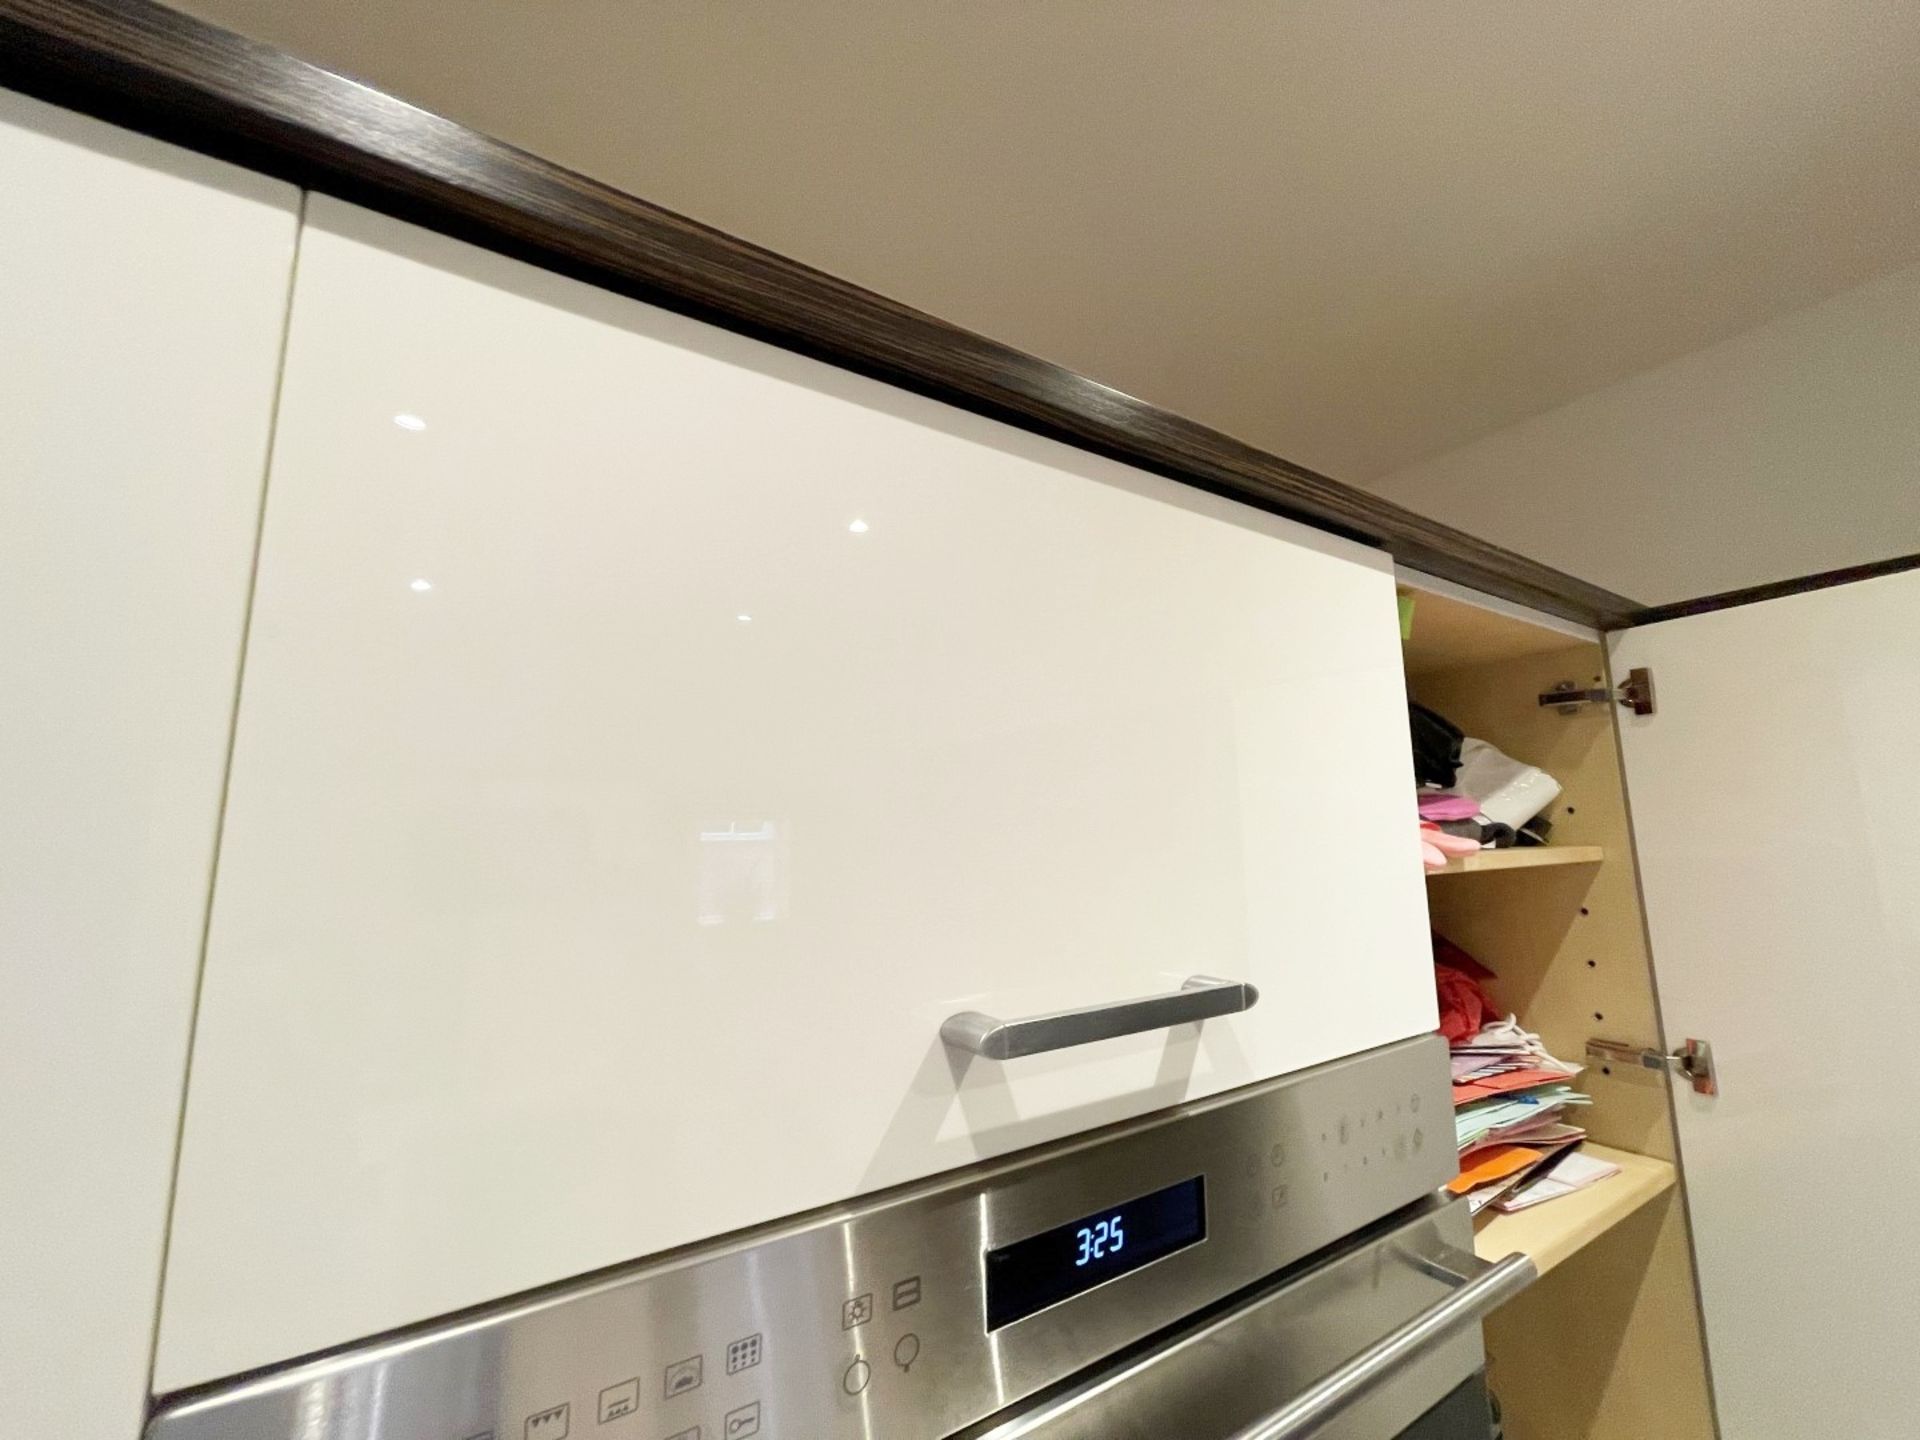 1 x Bespoke Fitted Mowlem & Co Kitchen With Miele and Sub Zero Appliances & Granite Worktops - - Image 46 of 54